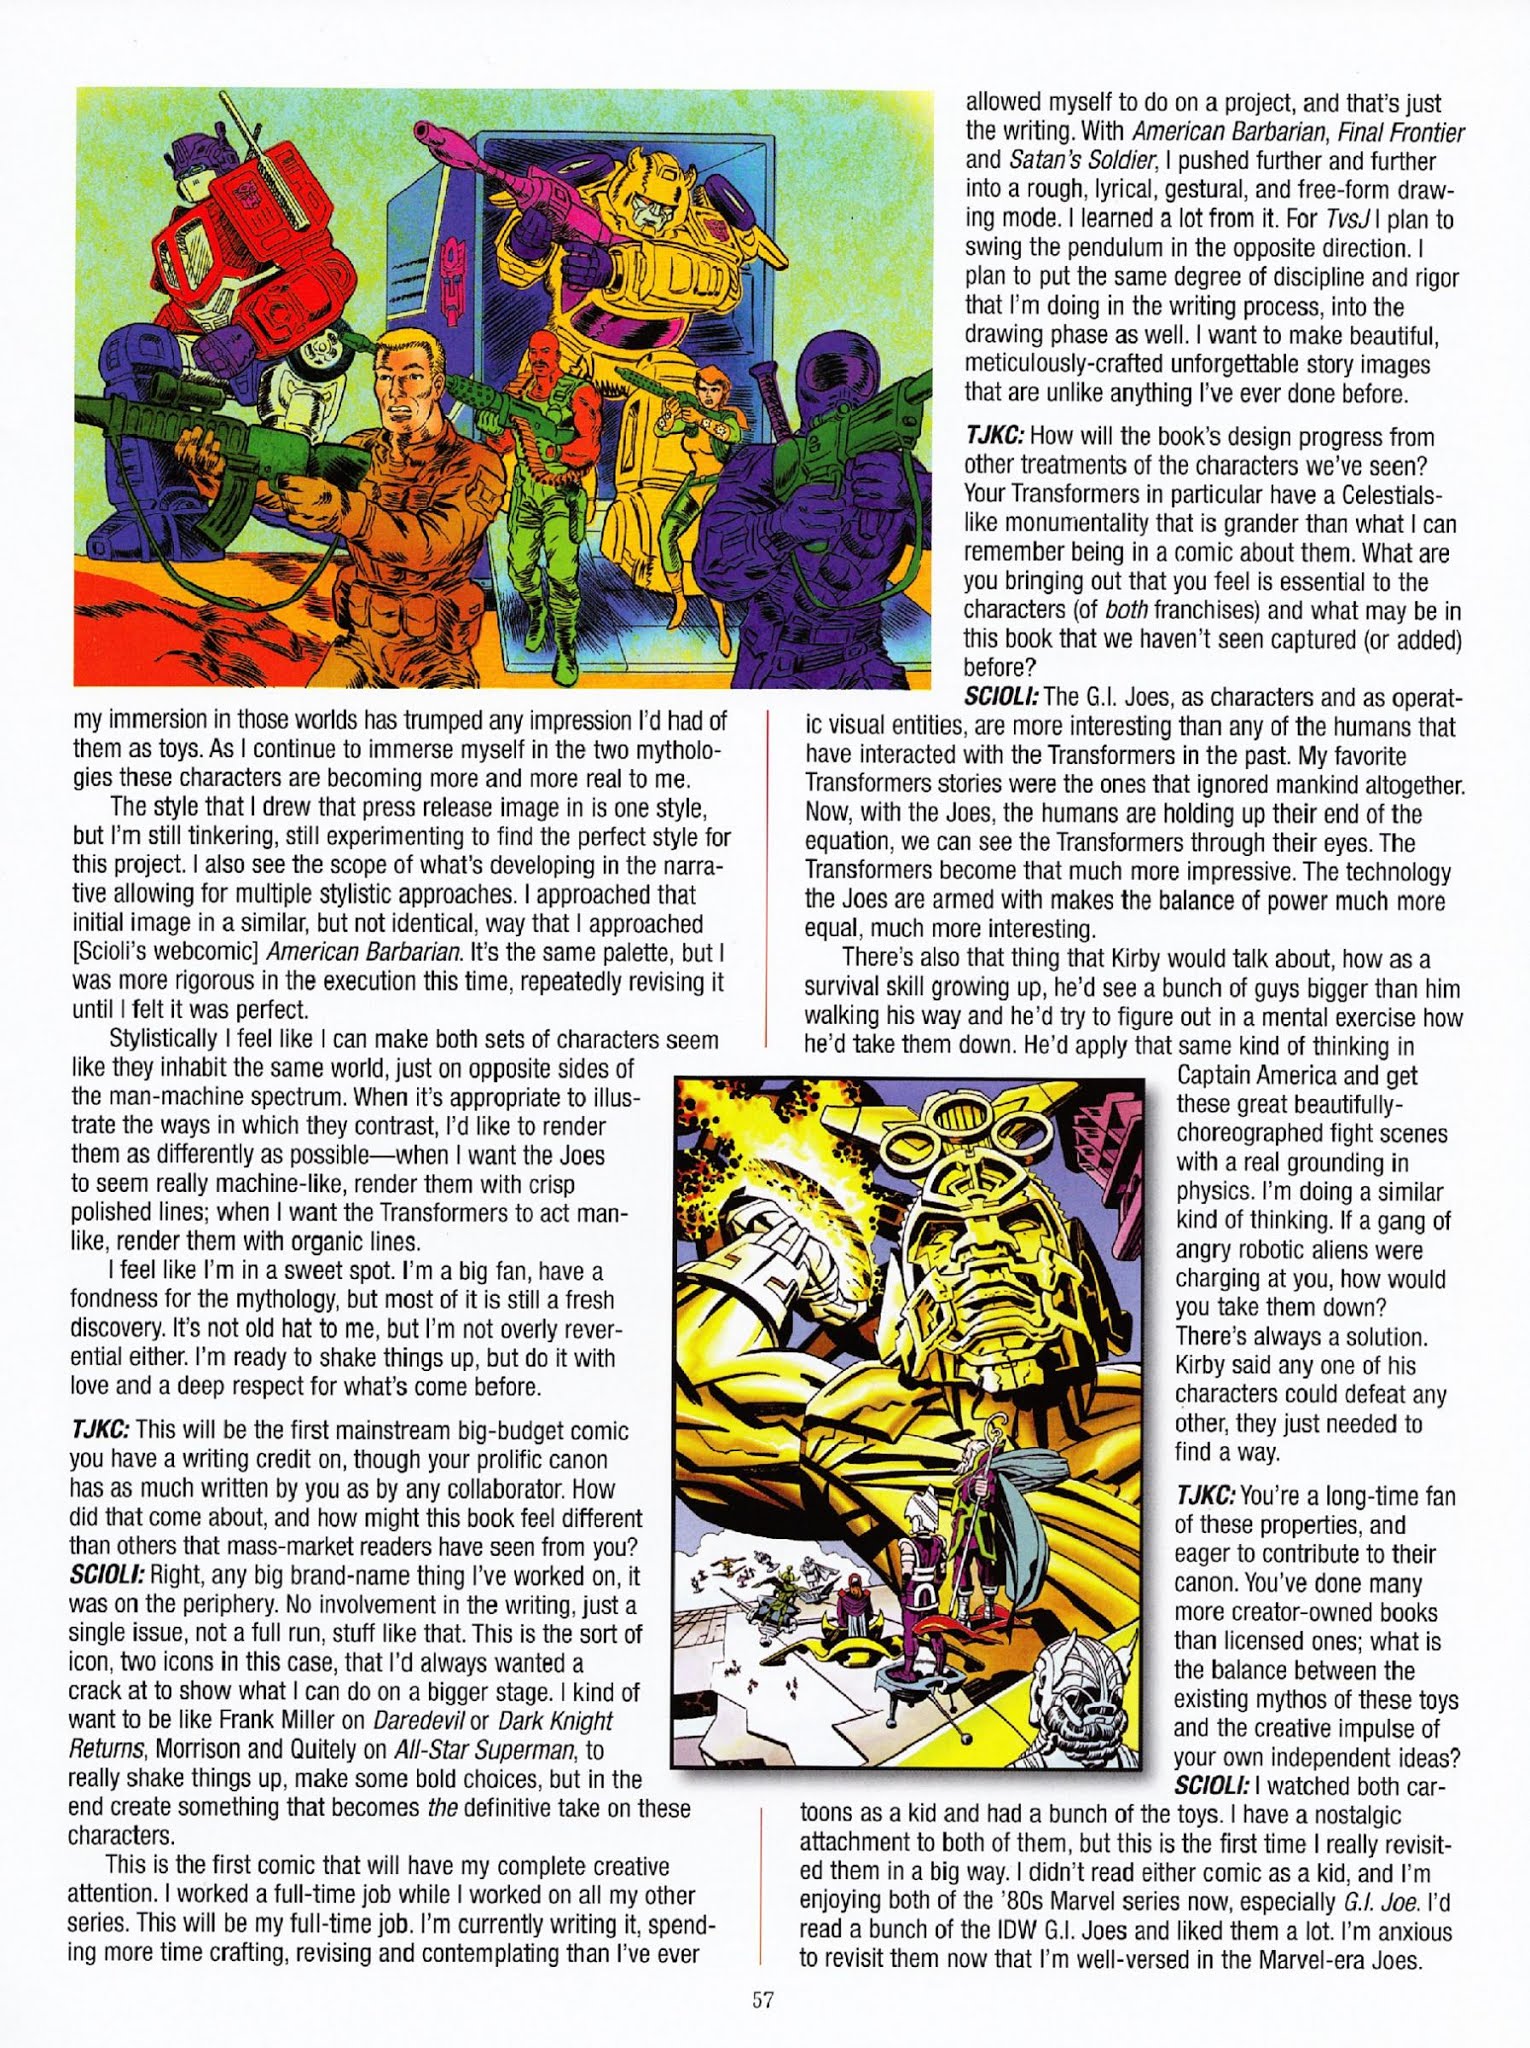 Read online The Jack Kirby Collector comic -  Issue #62 - 58